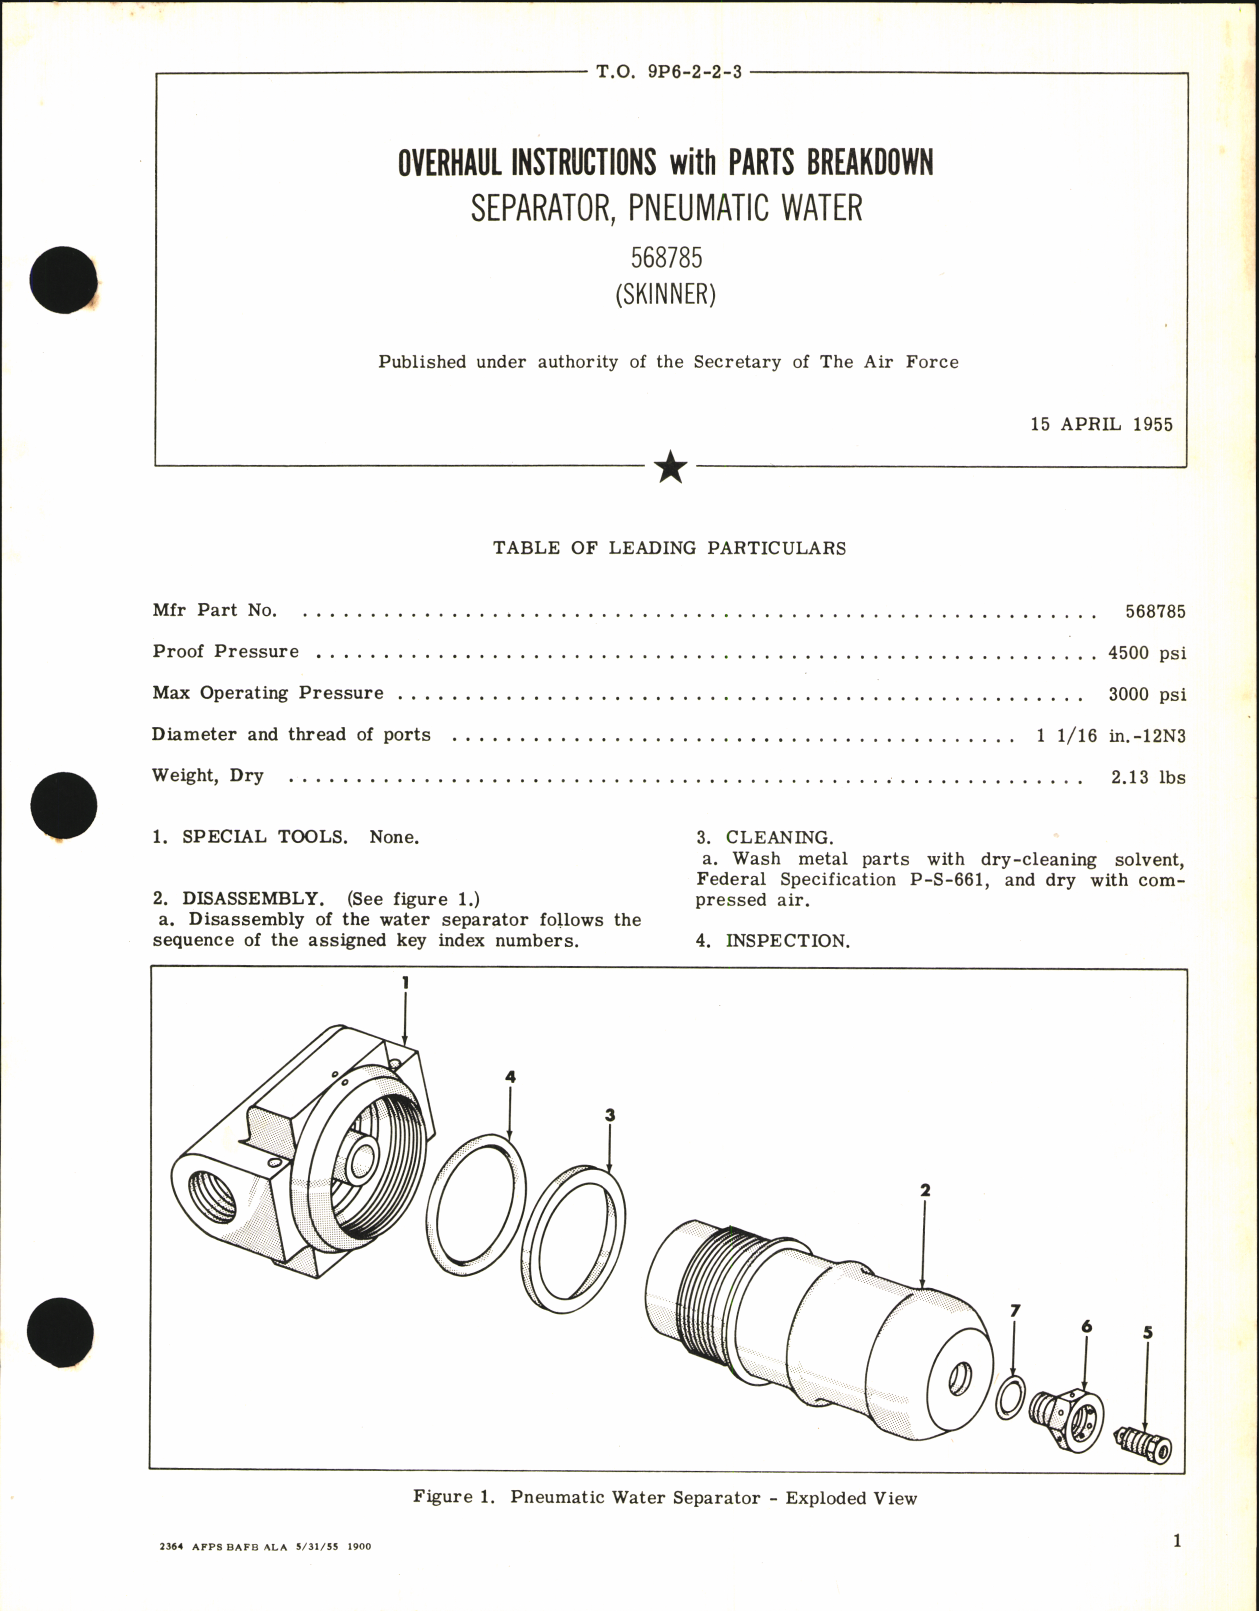 Sample page 1 from AirCorps Library document: Overhaul Instructions with Parts Breakdown for Separator, Pneumatic Water 568785